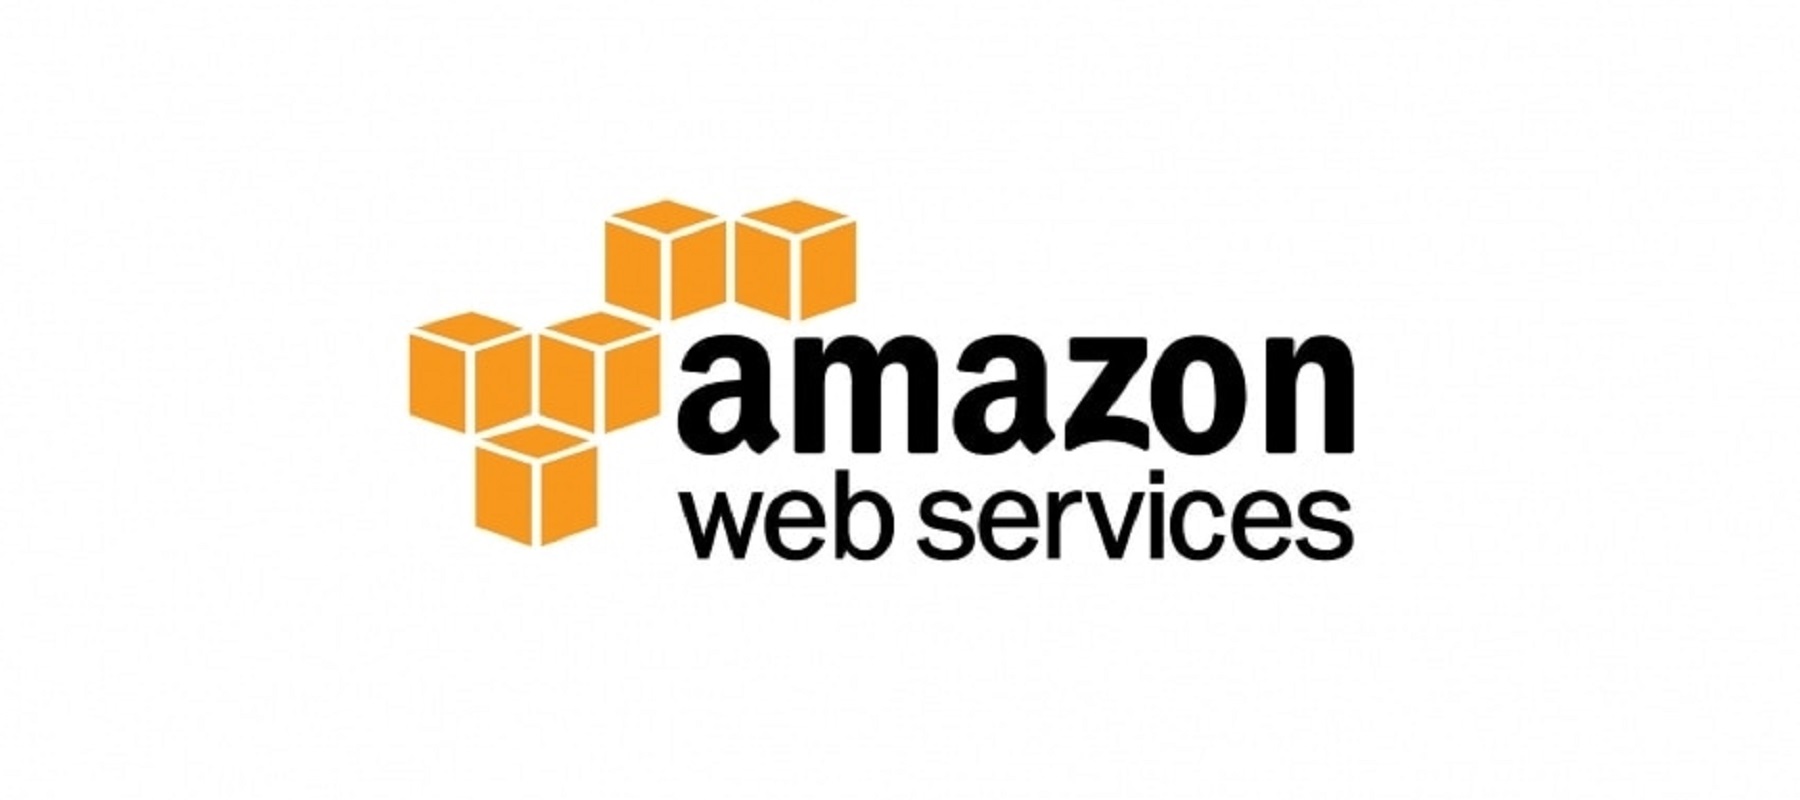 Amazon Web Services announces new offerings to accelerate generative AI innovation